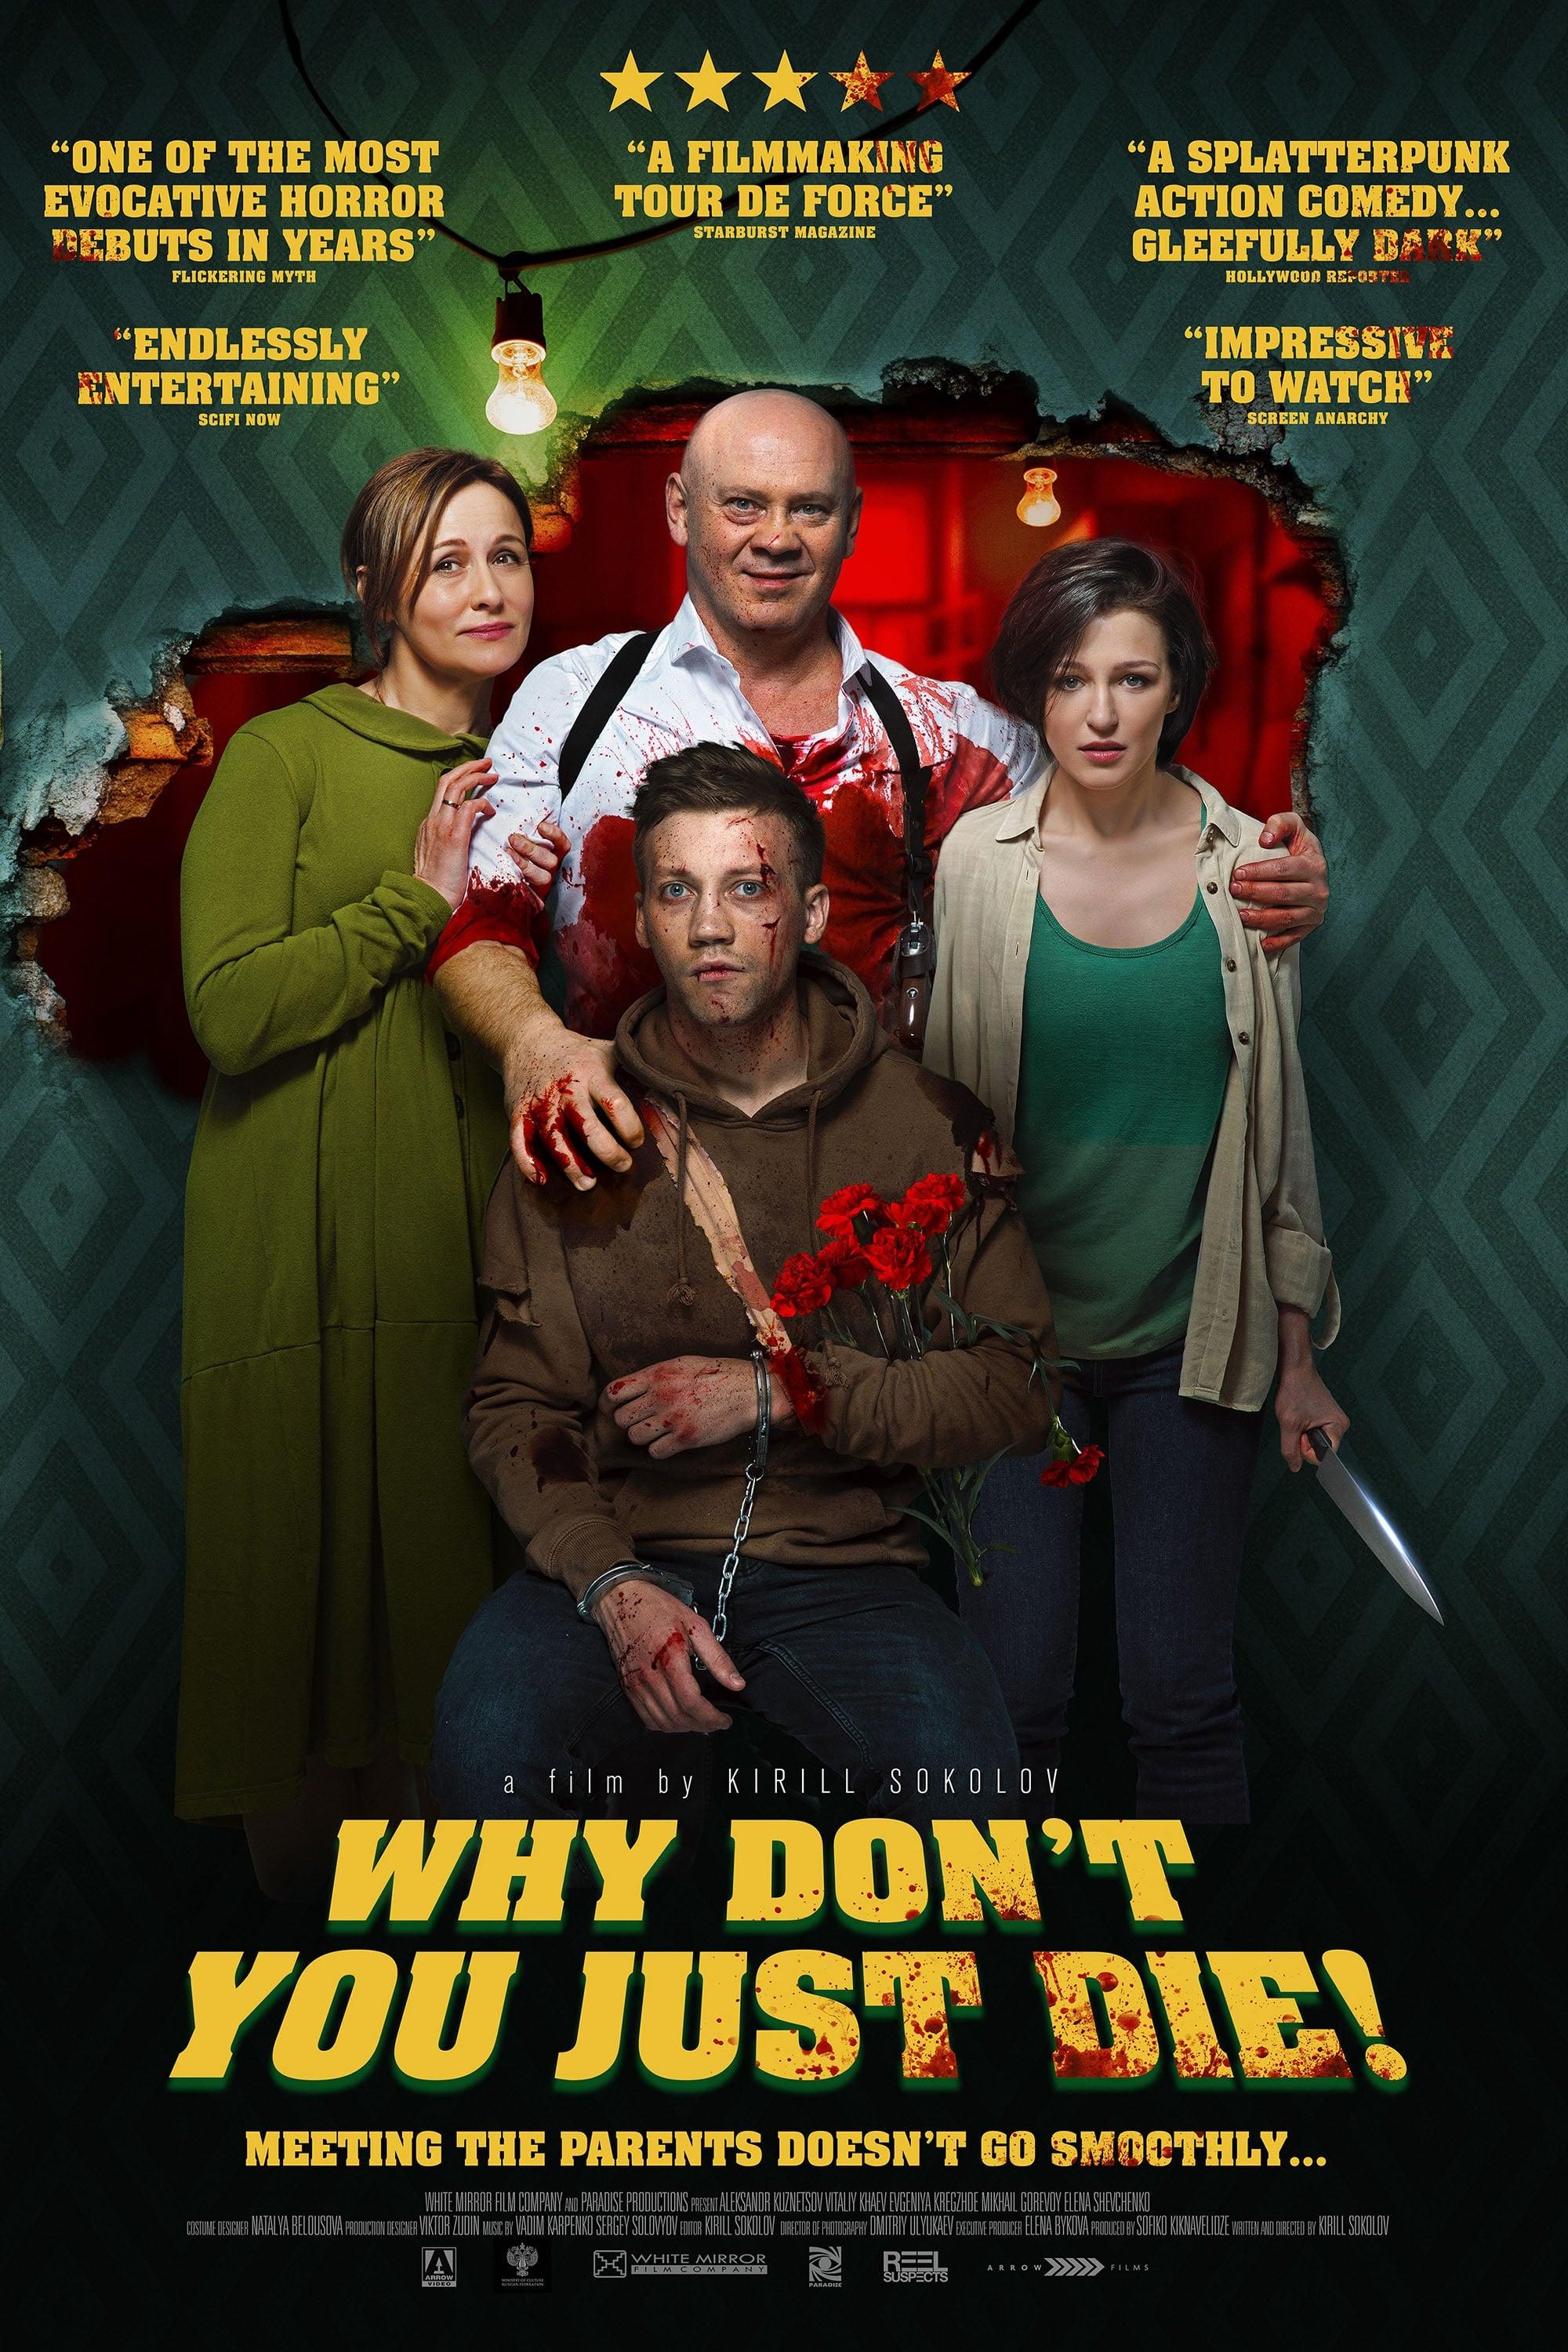 Why Don't You Just Die! poster